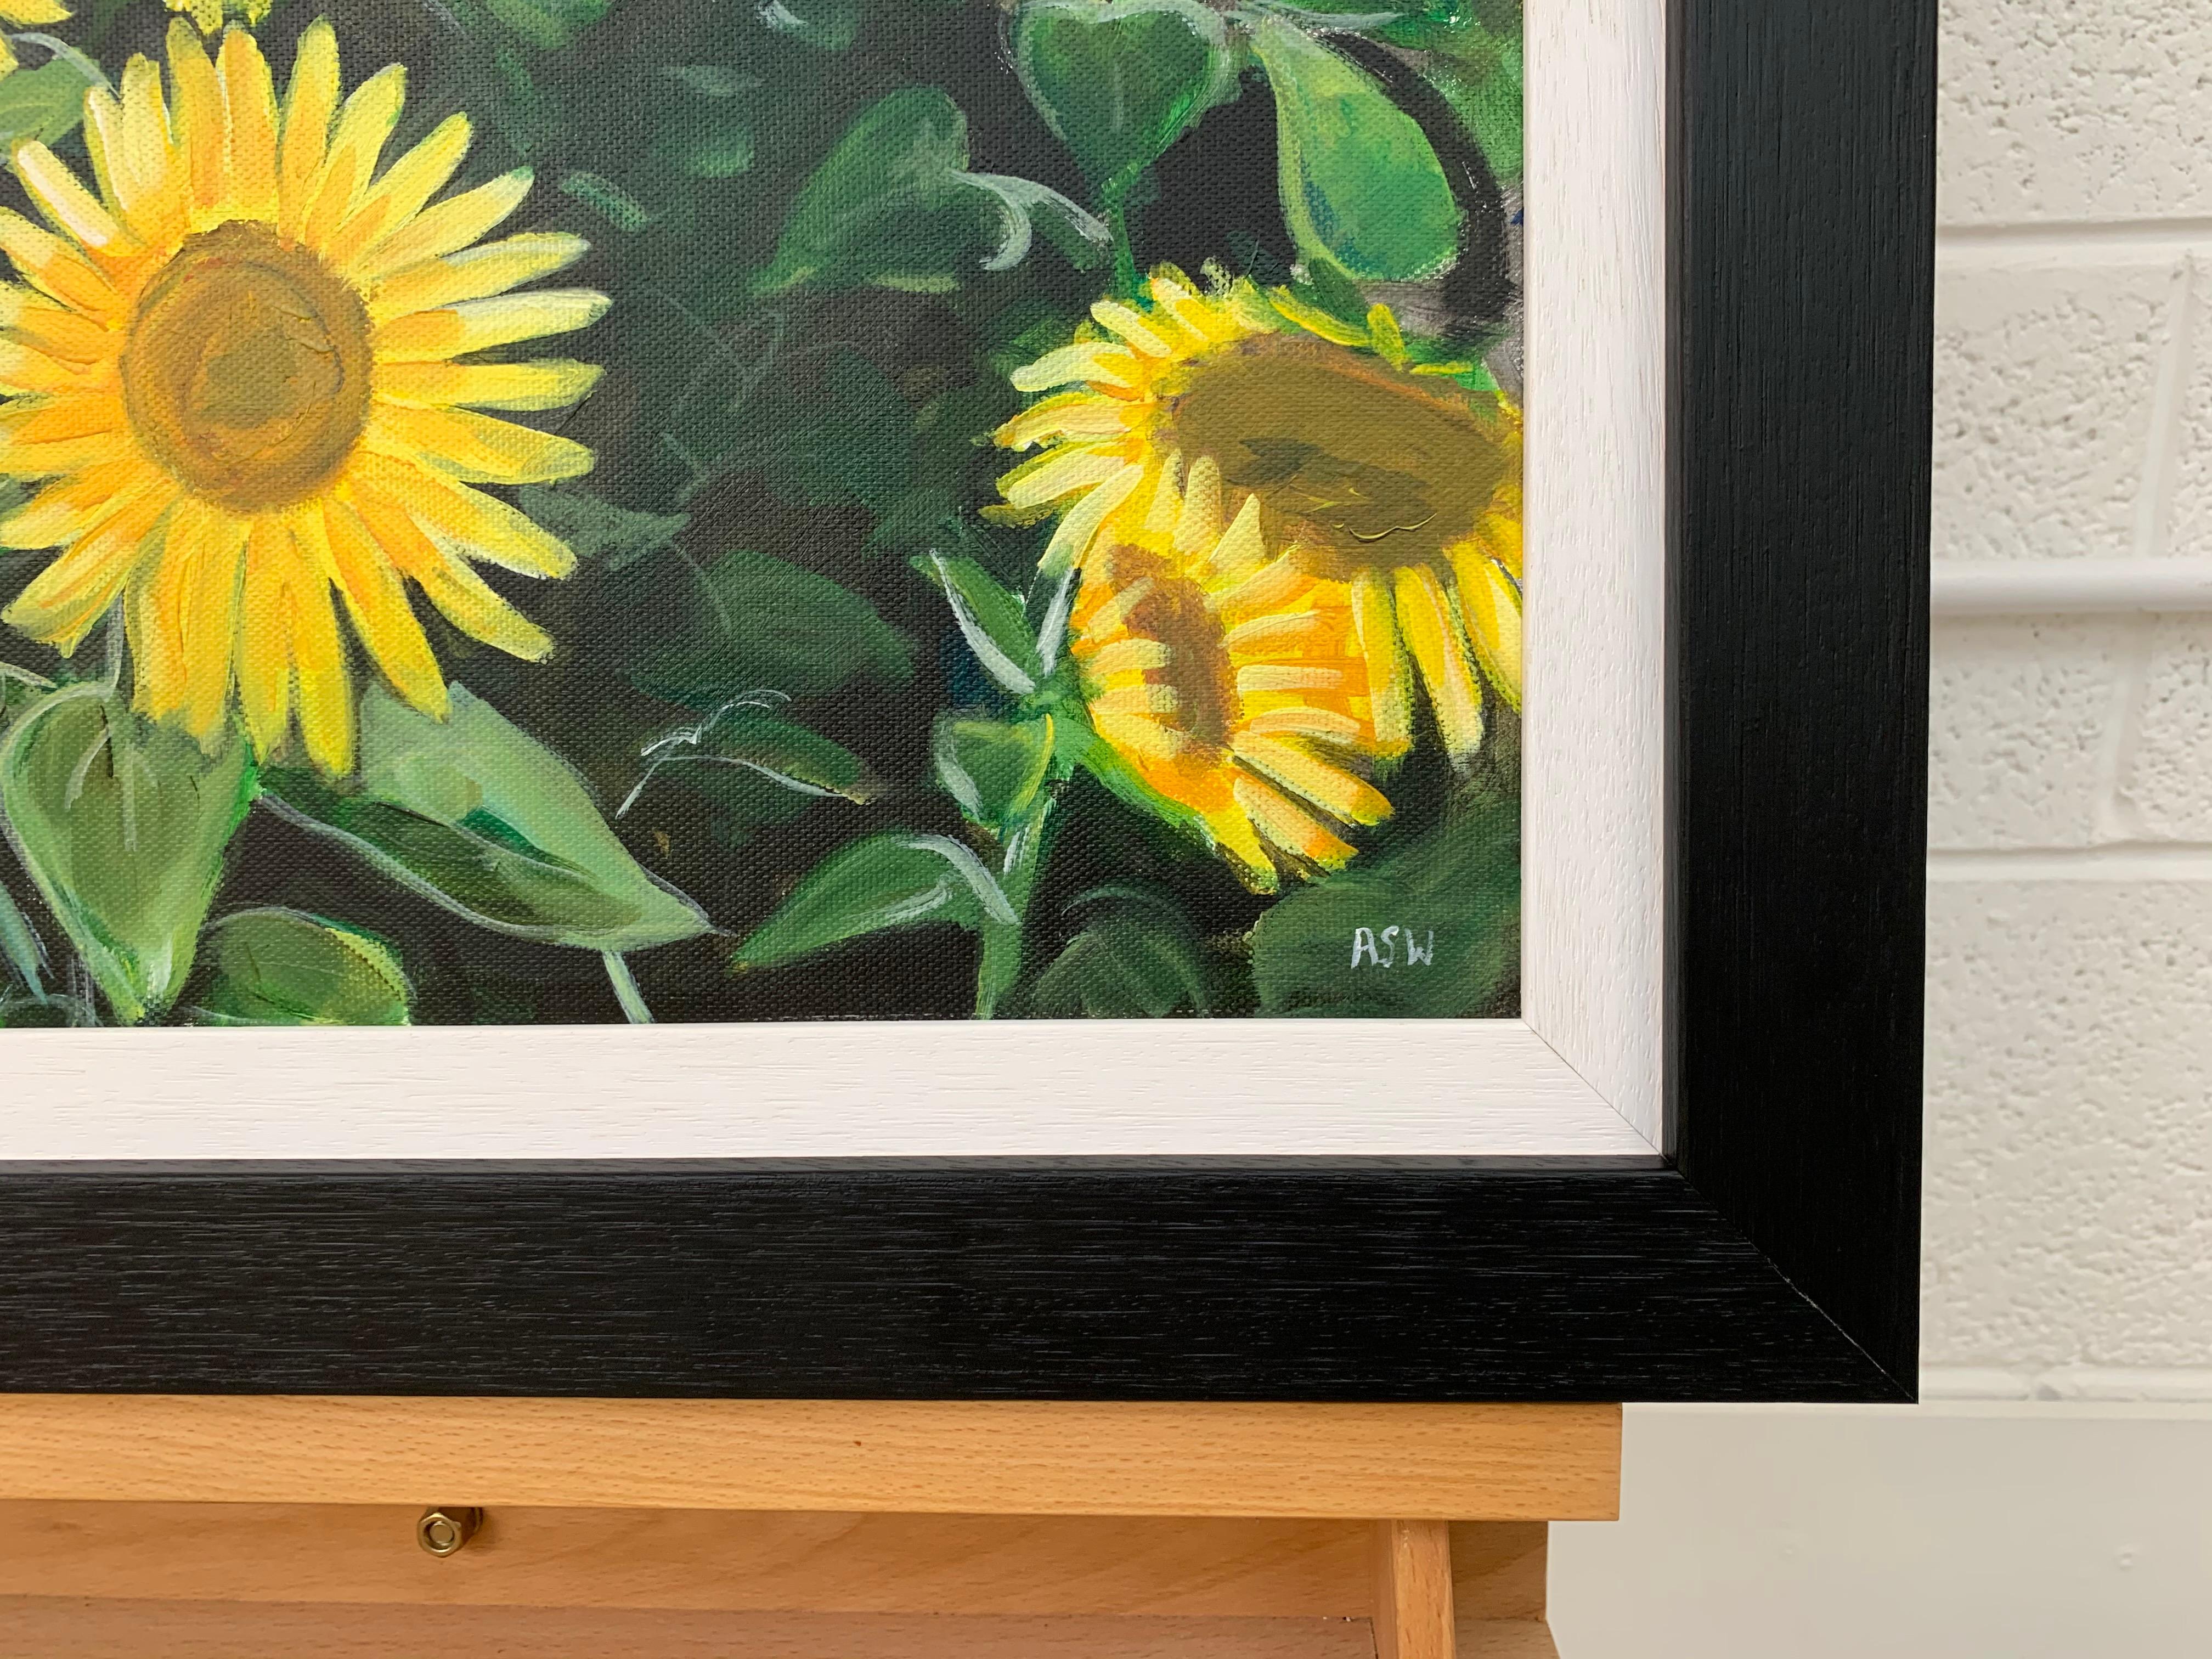 Original Painting of a Field of Sunflowers in the Sunshine, France by leading British Landscape Artist, Angela Wakefield. 

Art measures 18 x 24 inches
Frame measures 23 x 29 inches

Angela Wakefield has twice been on the front cover of ‘Art of